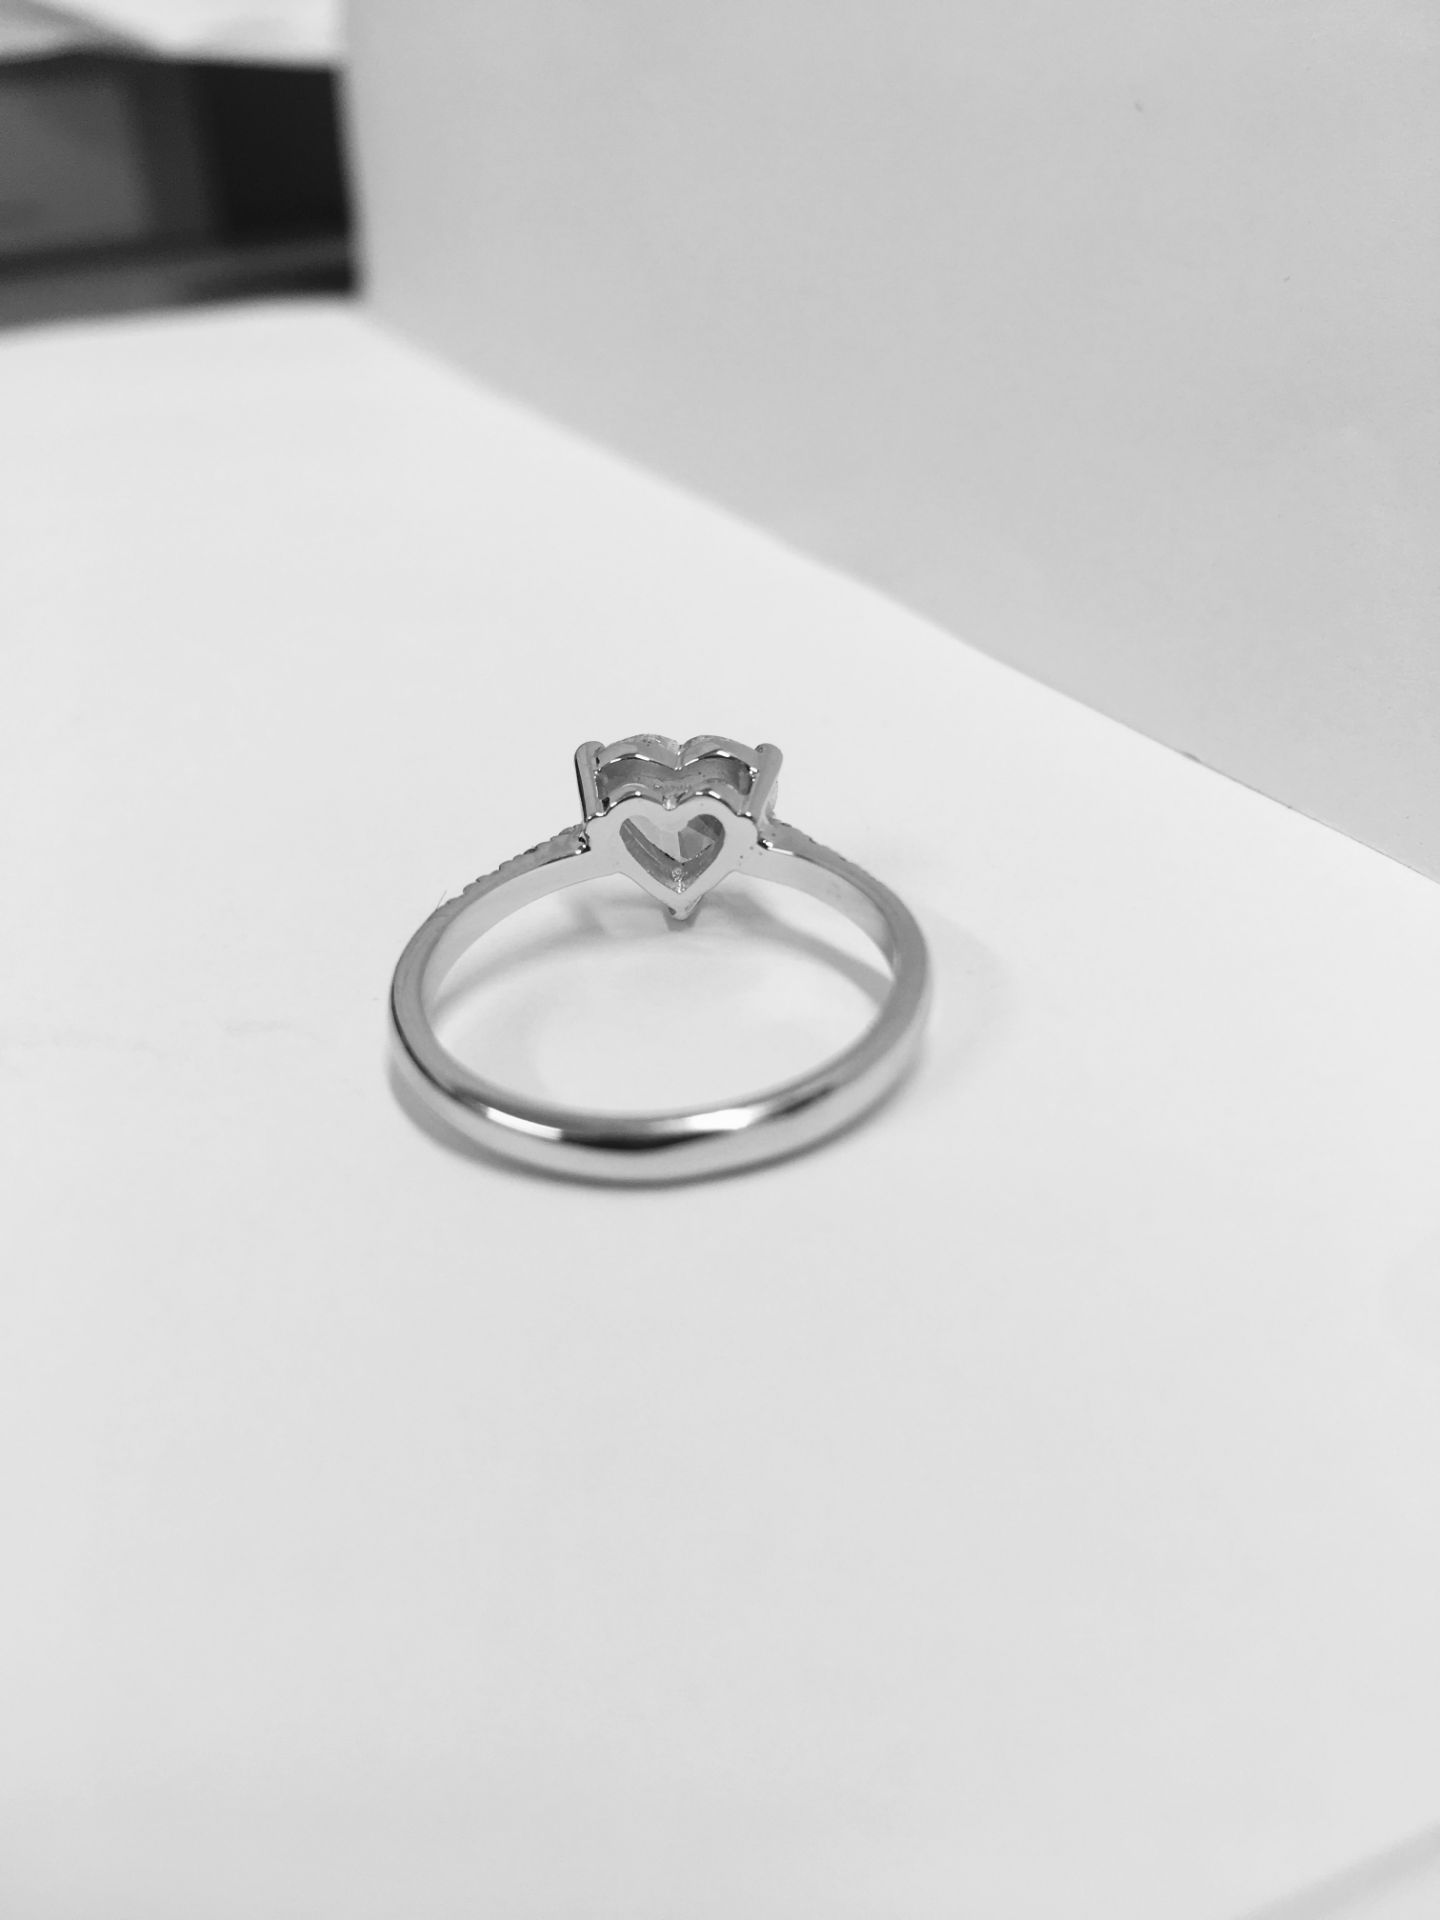 1Ct Heart Shape Diamond Solitaire Ring, - Image 3 of 6